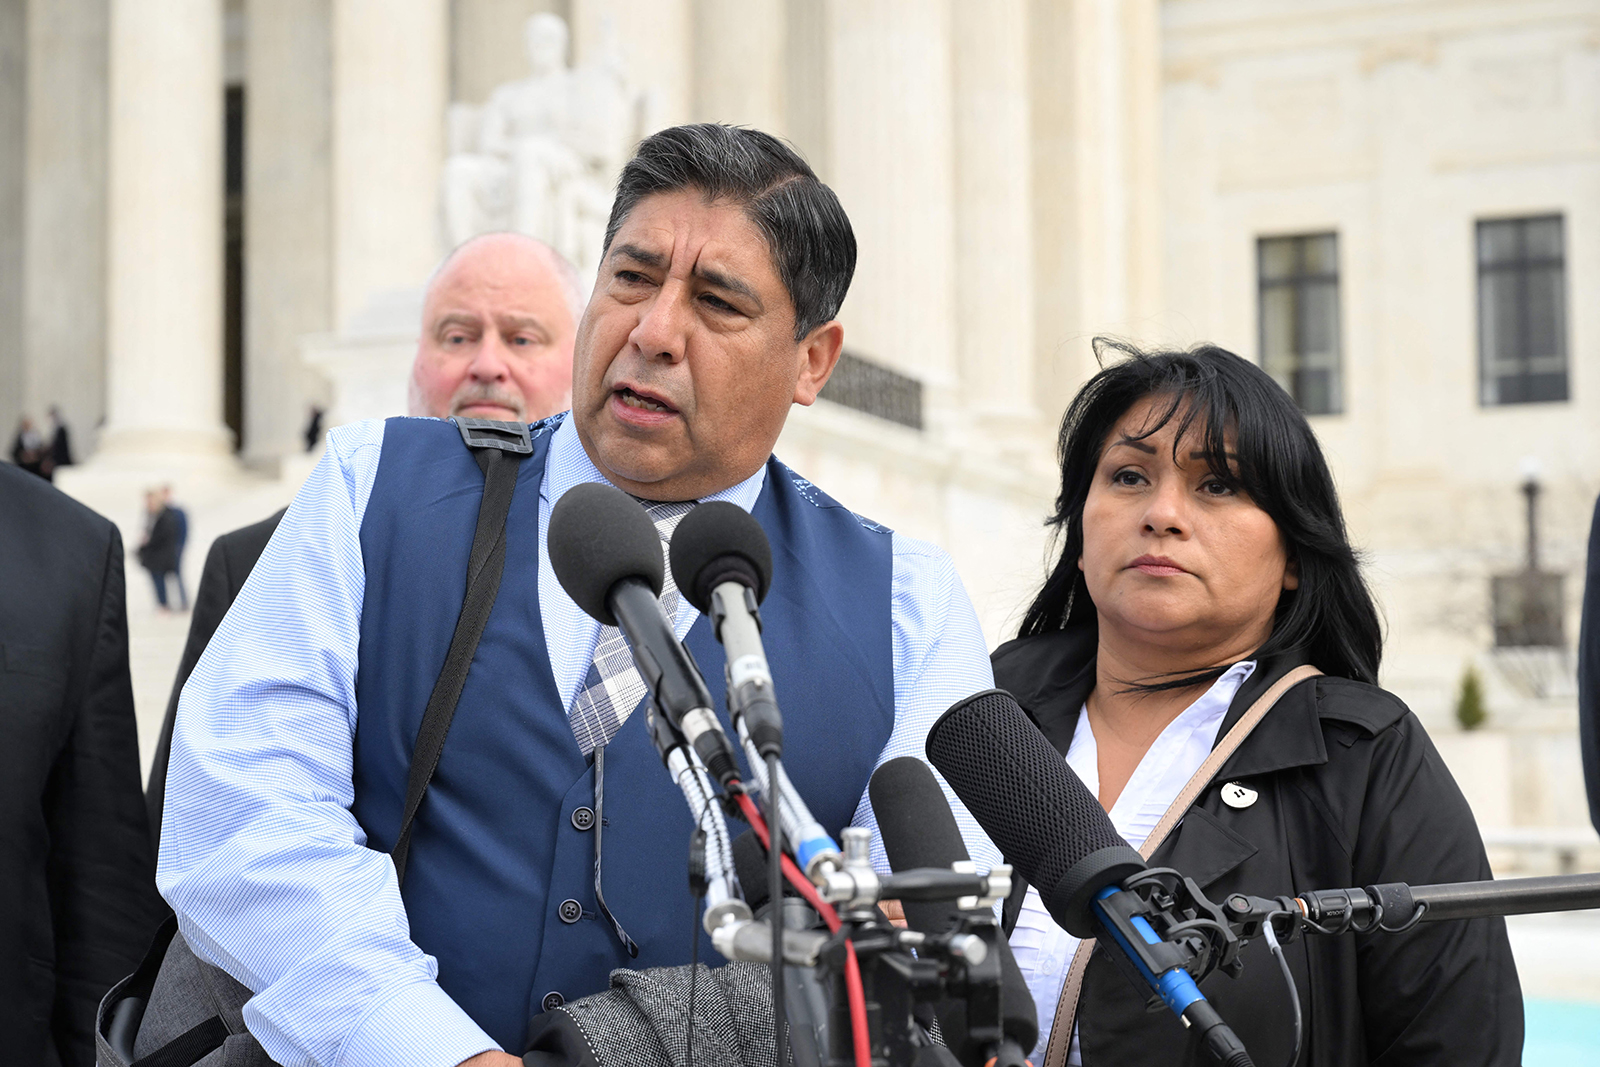 Beatriz Gonzalez and Jose Hernandez, the mother and stepfather of Nohemi Gonzalez, who died in a terrorist attack in Paris in 2015, speak to the media outside the US Supreme Court today following oral arguments in Gonzalez v. Google in Washington, DC.